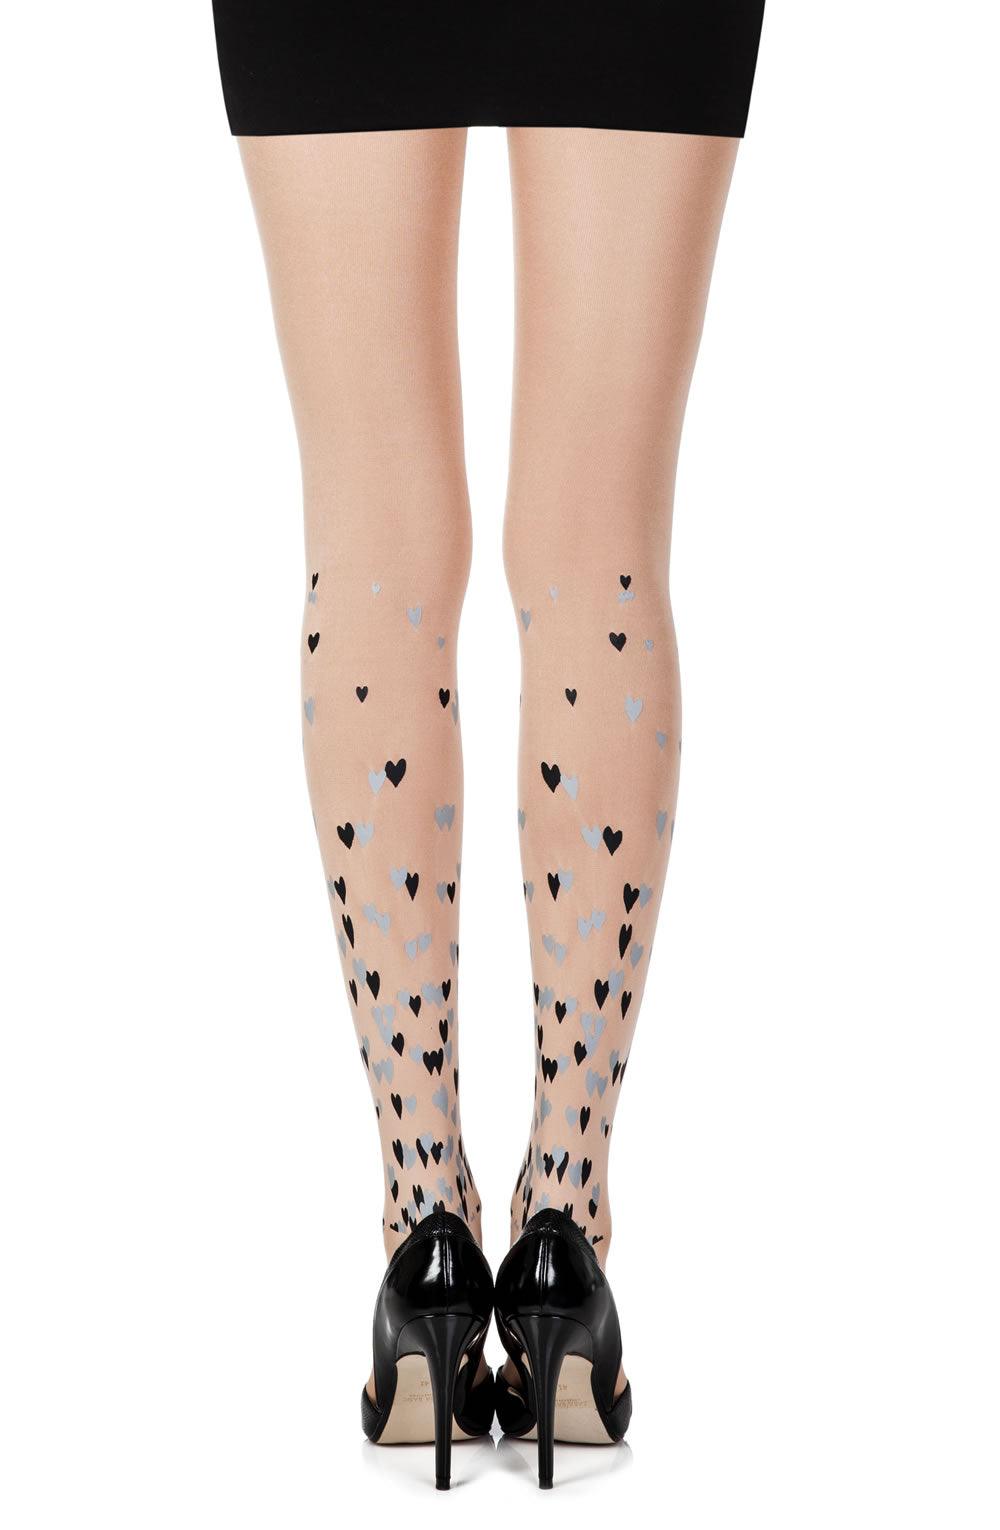 Zohara "Queen Of Hearts" Powder Print Tights - Sydney Rose Lingerie 